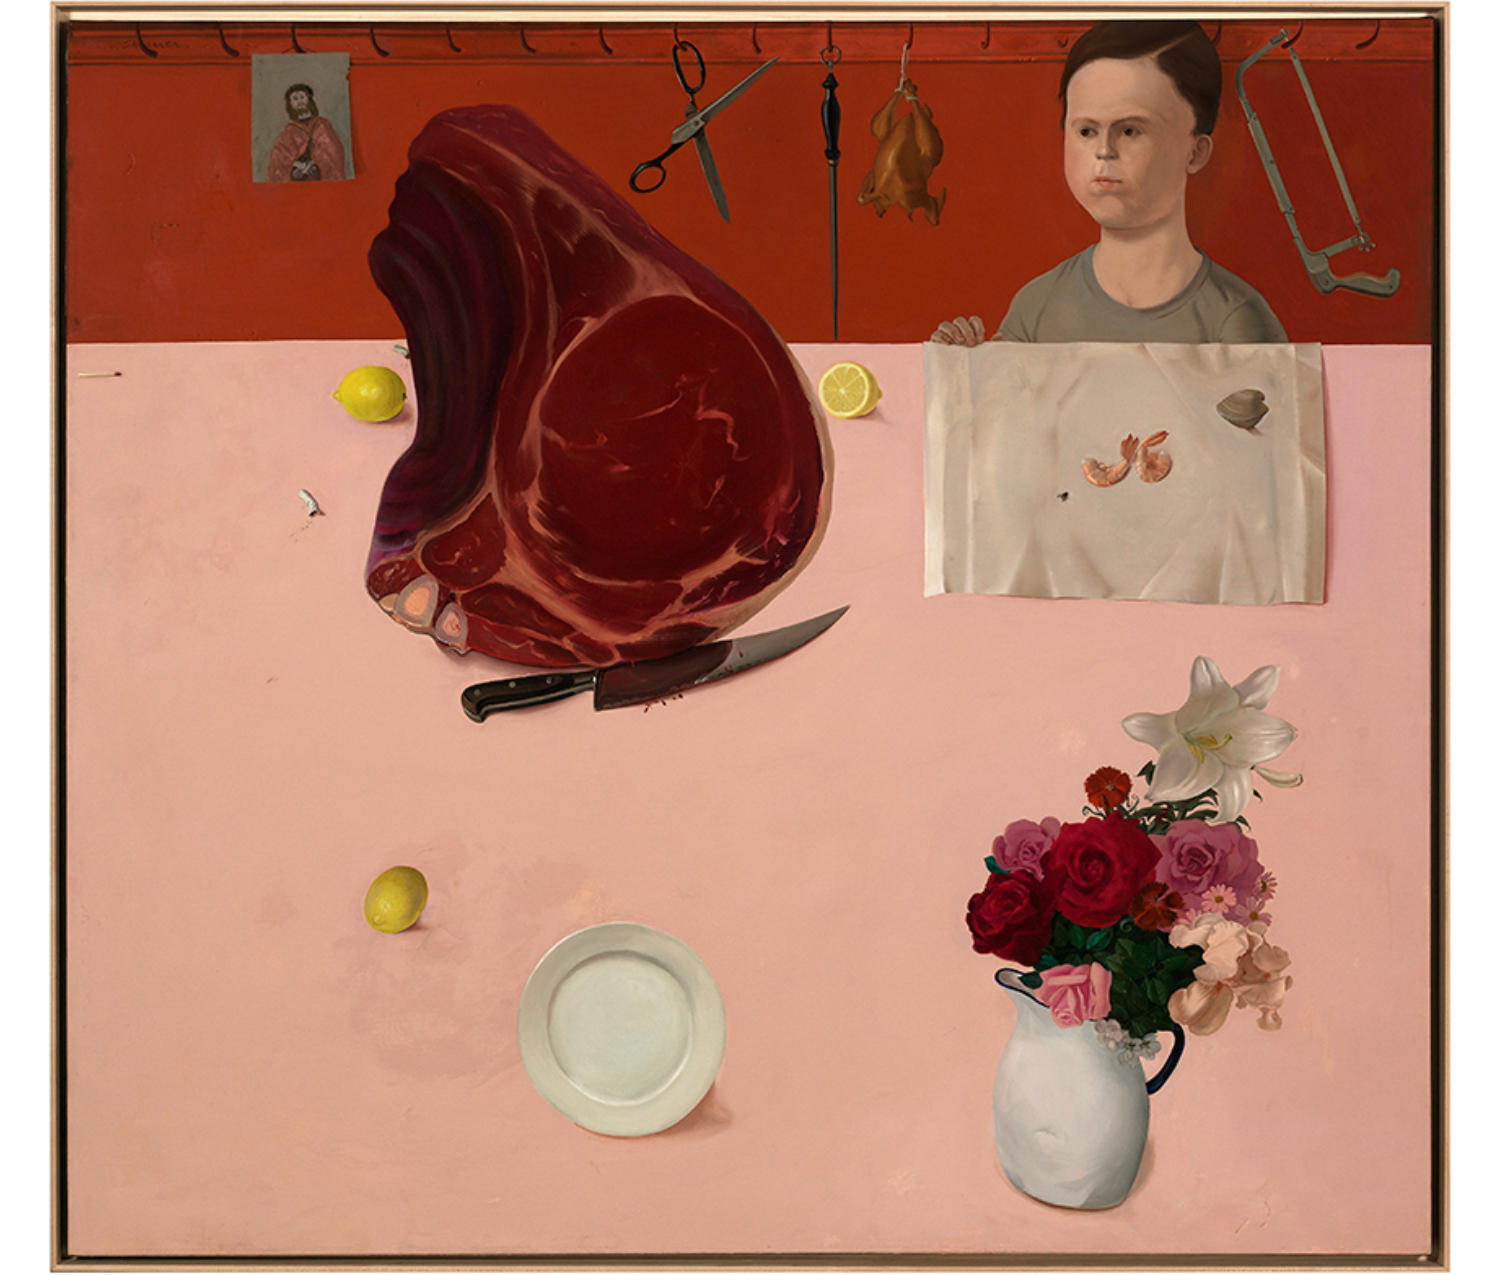 boy standing at pink tabletop observing a collection of items on the table: cut of meat and bloody knife, lemons, plate, white pitcher holding flowers, and two shrimp and a clam on a white napkin. Behind him, a portrait of Jesus, a pair of scissors, a knife steel, a chicken, and a saw hang on a row of hooks.